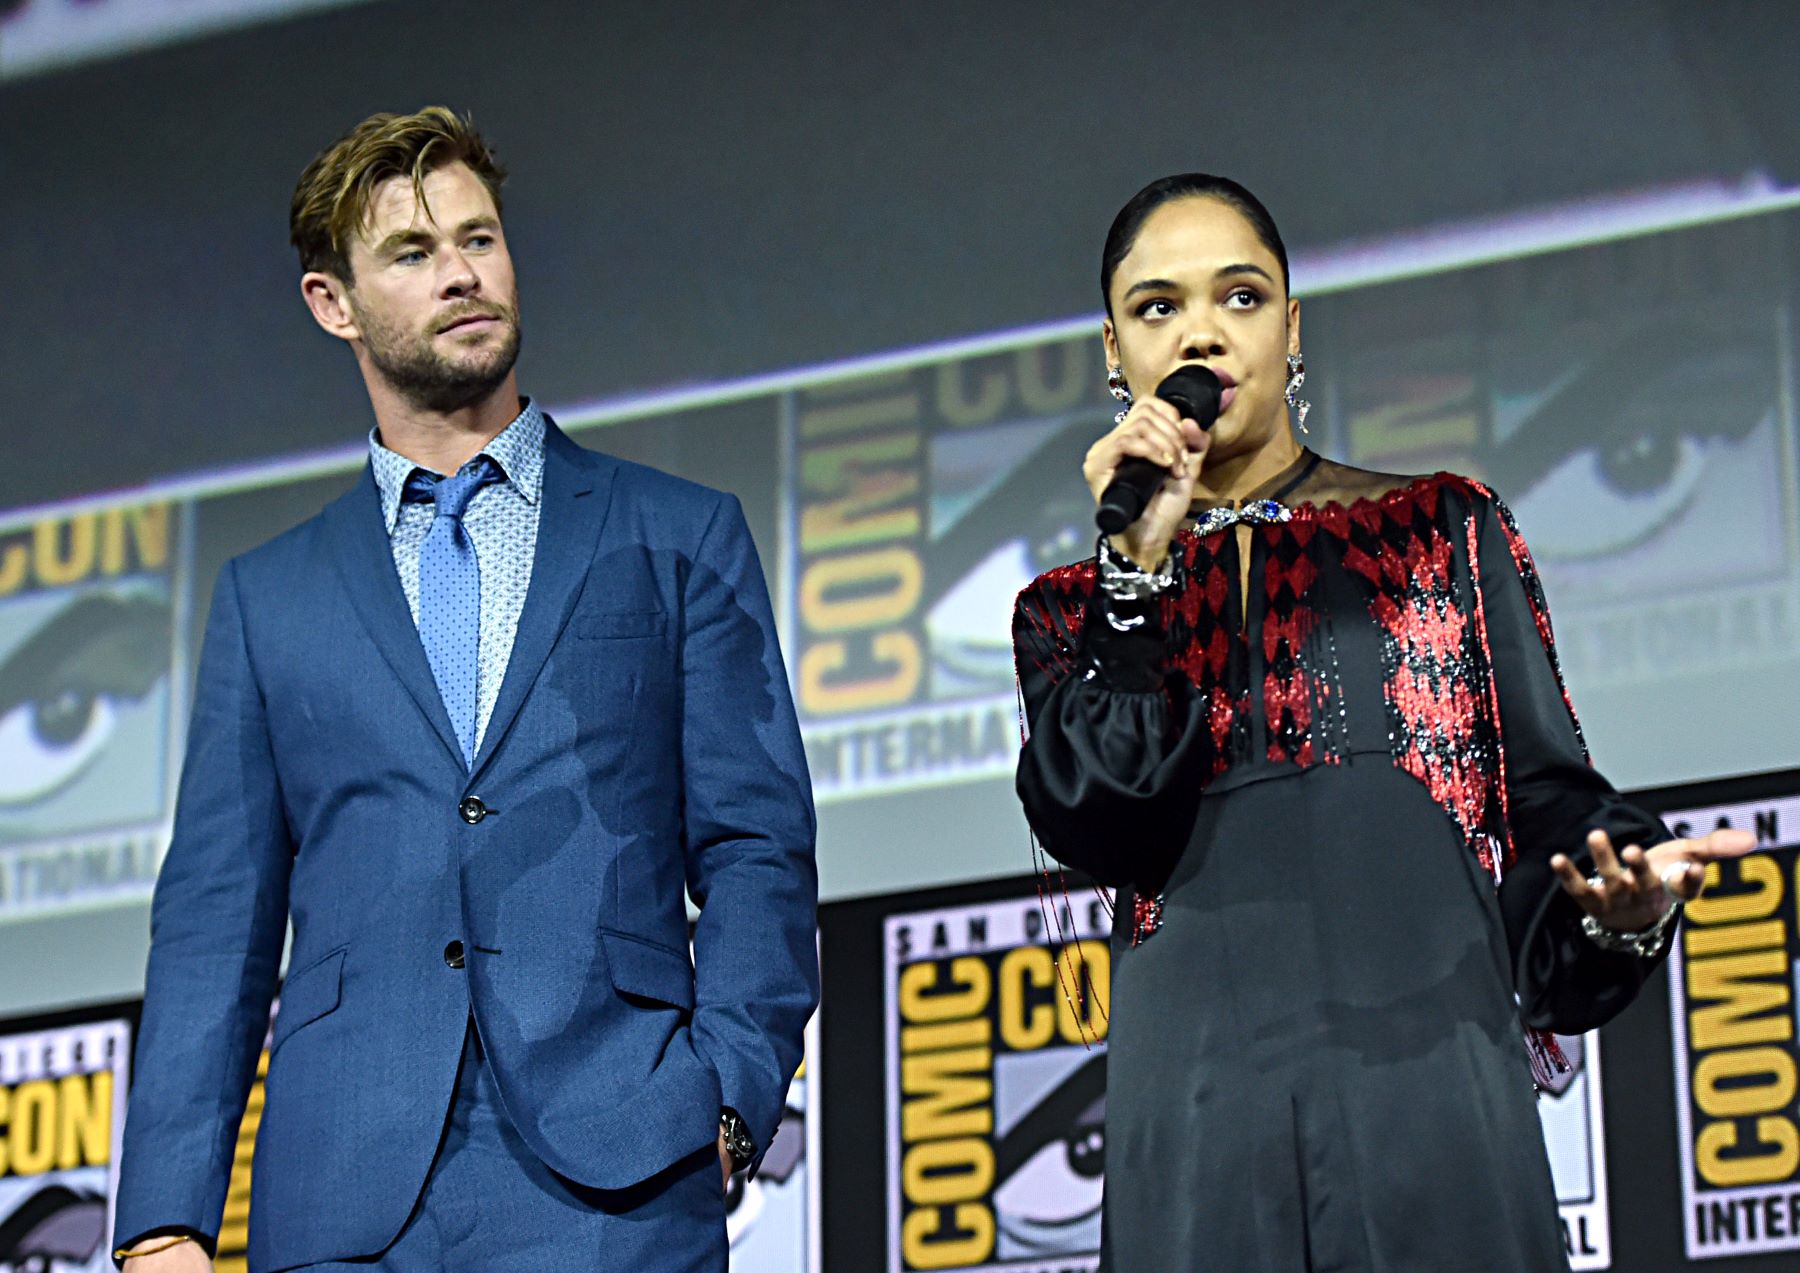 Tessa Thompson Has 5 Words to Describe Her Chemistry With Chris Hemsworth